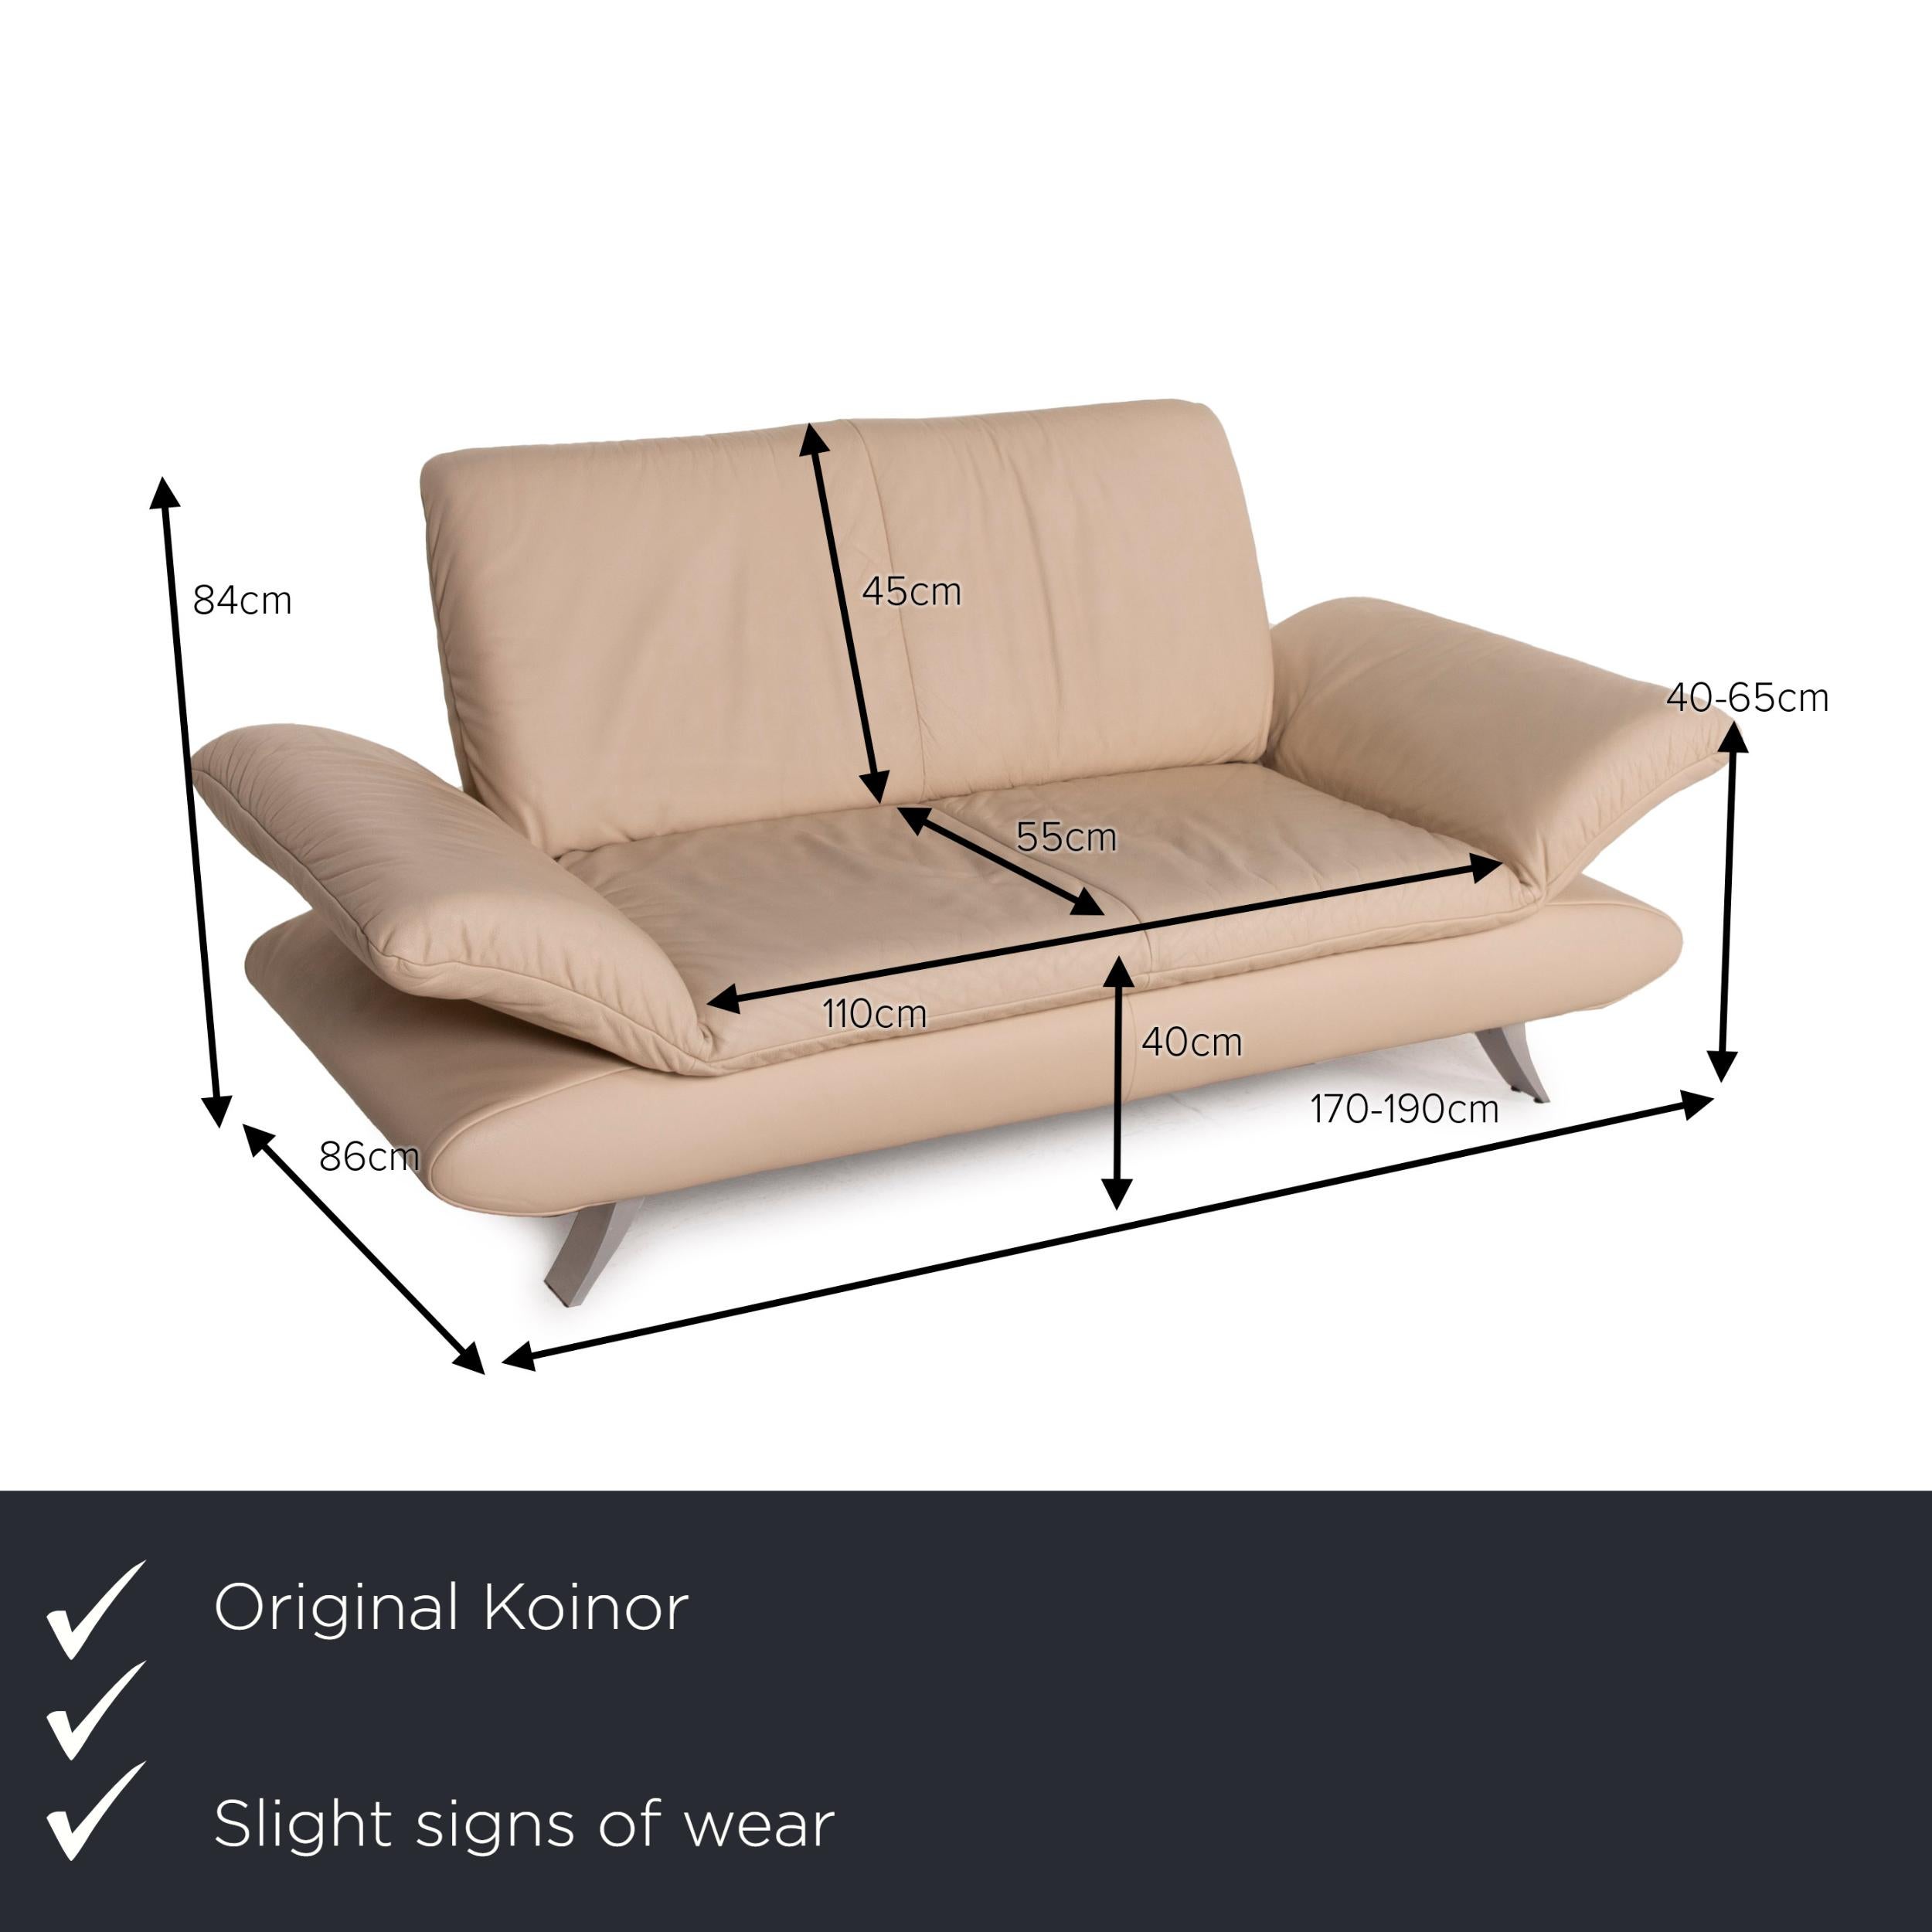 We present to you a Koinor Rossini leather sofa cream two-seater.

Product measurements in centimeters:

Depth 86
Width 190
Height 84
Seat height 40
Rest height 40
Seat depth 55
Seat width 110
Back height 45. 
 
 
  